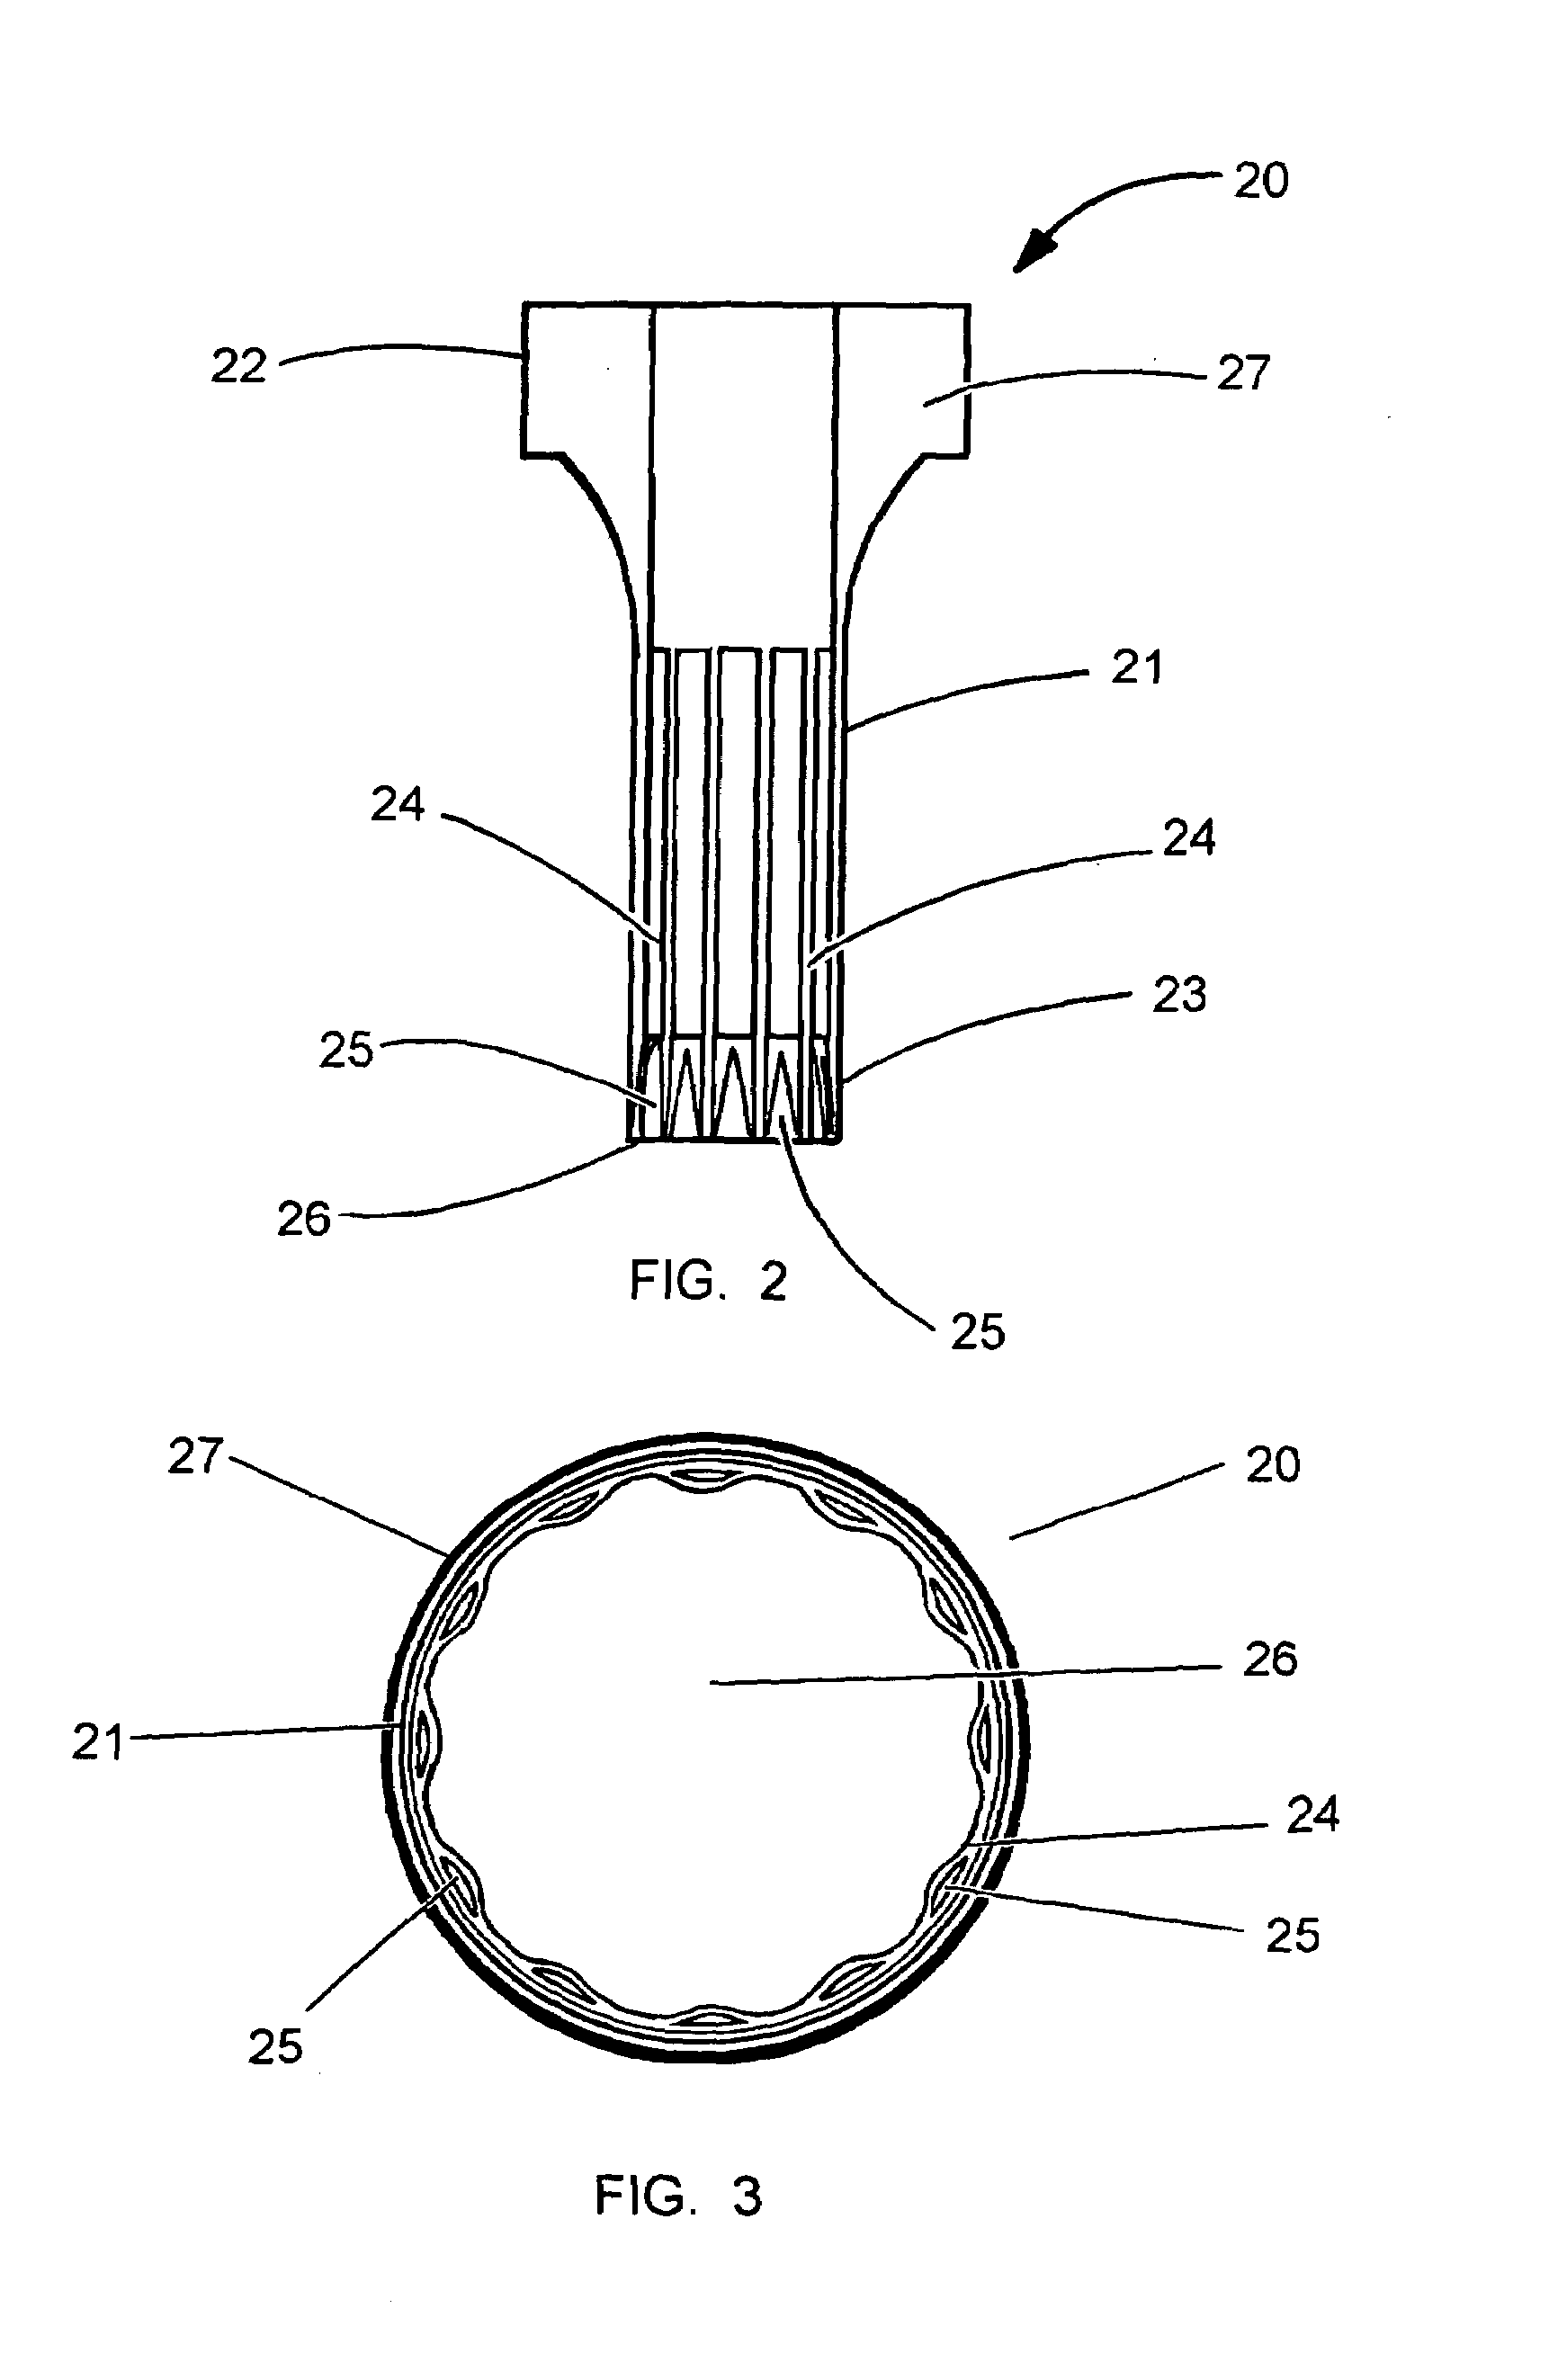 External tube extraction device with a cylindrical collapsing wedge